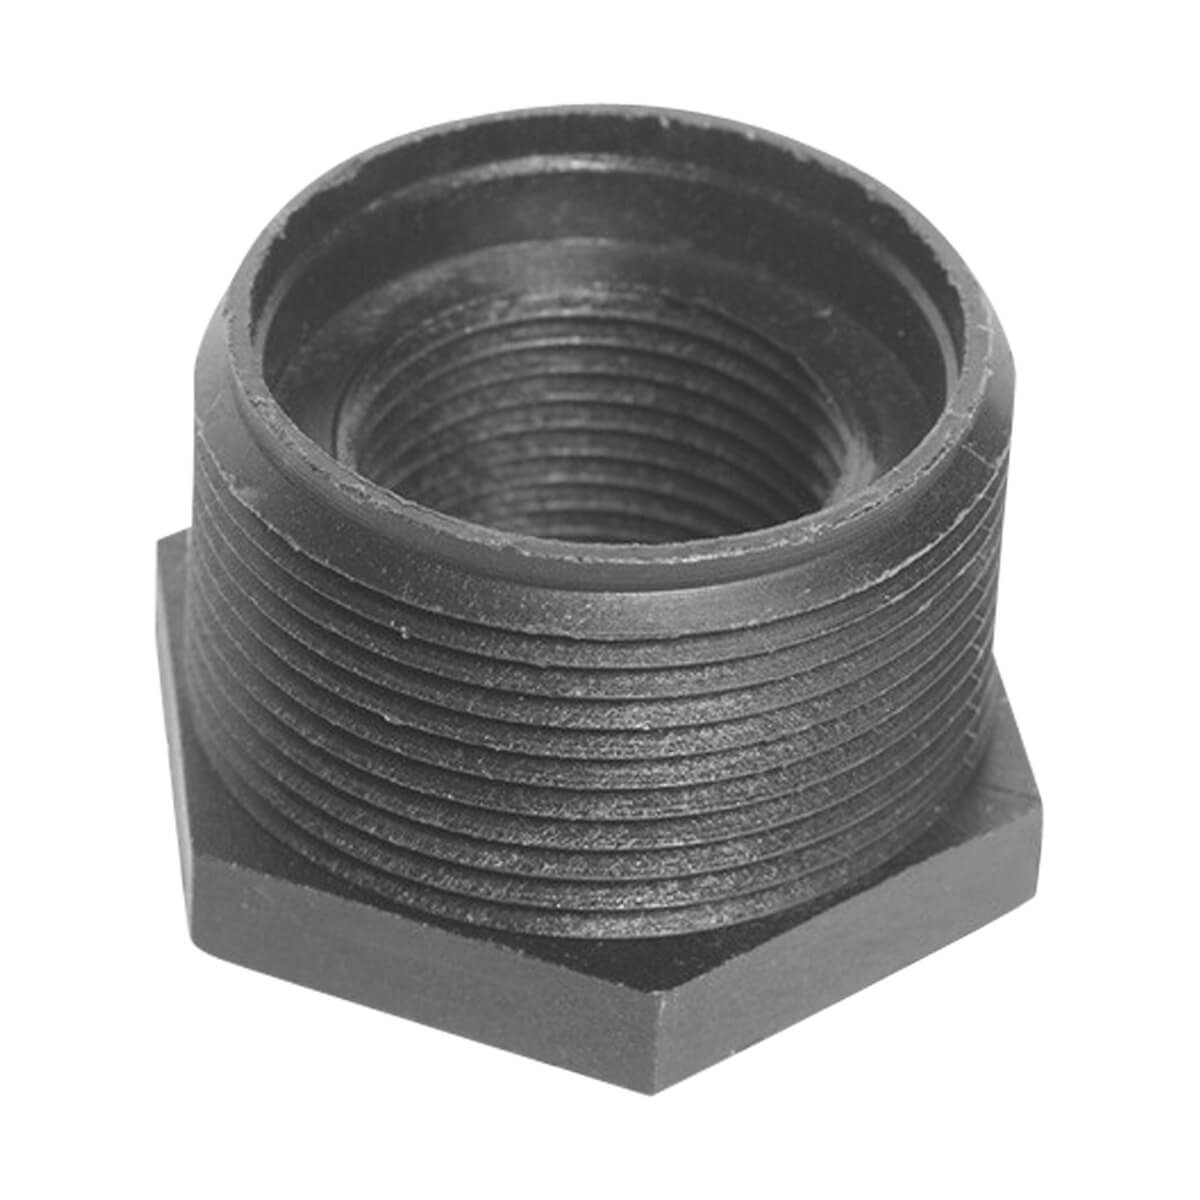 Reducer Bushings MPT x FPT - 3/4-in x 1/2-in